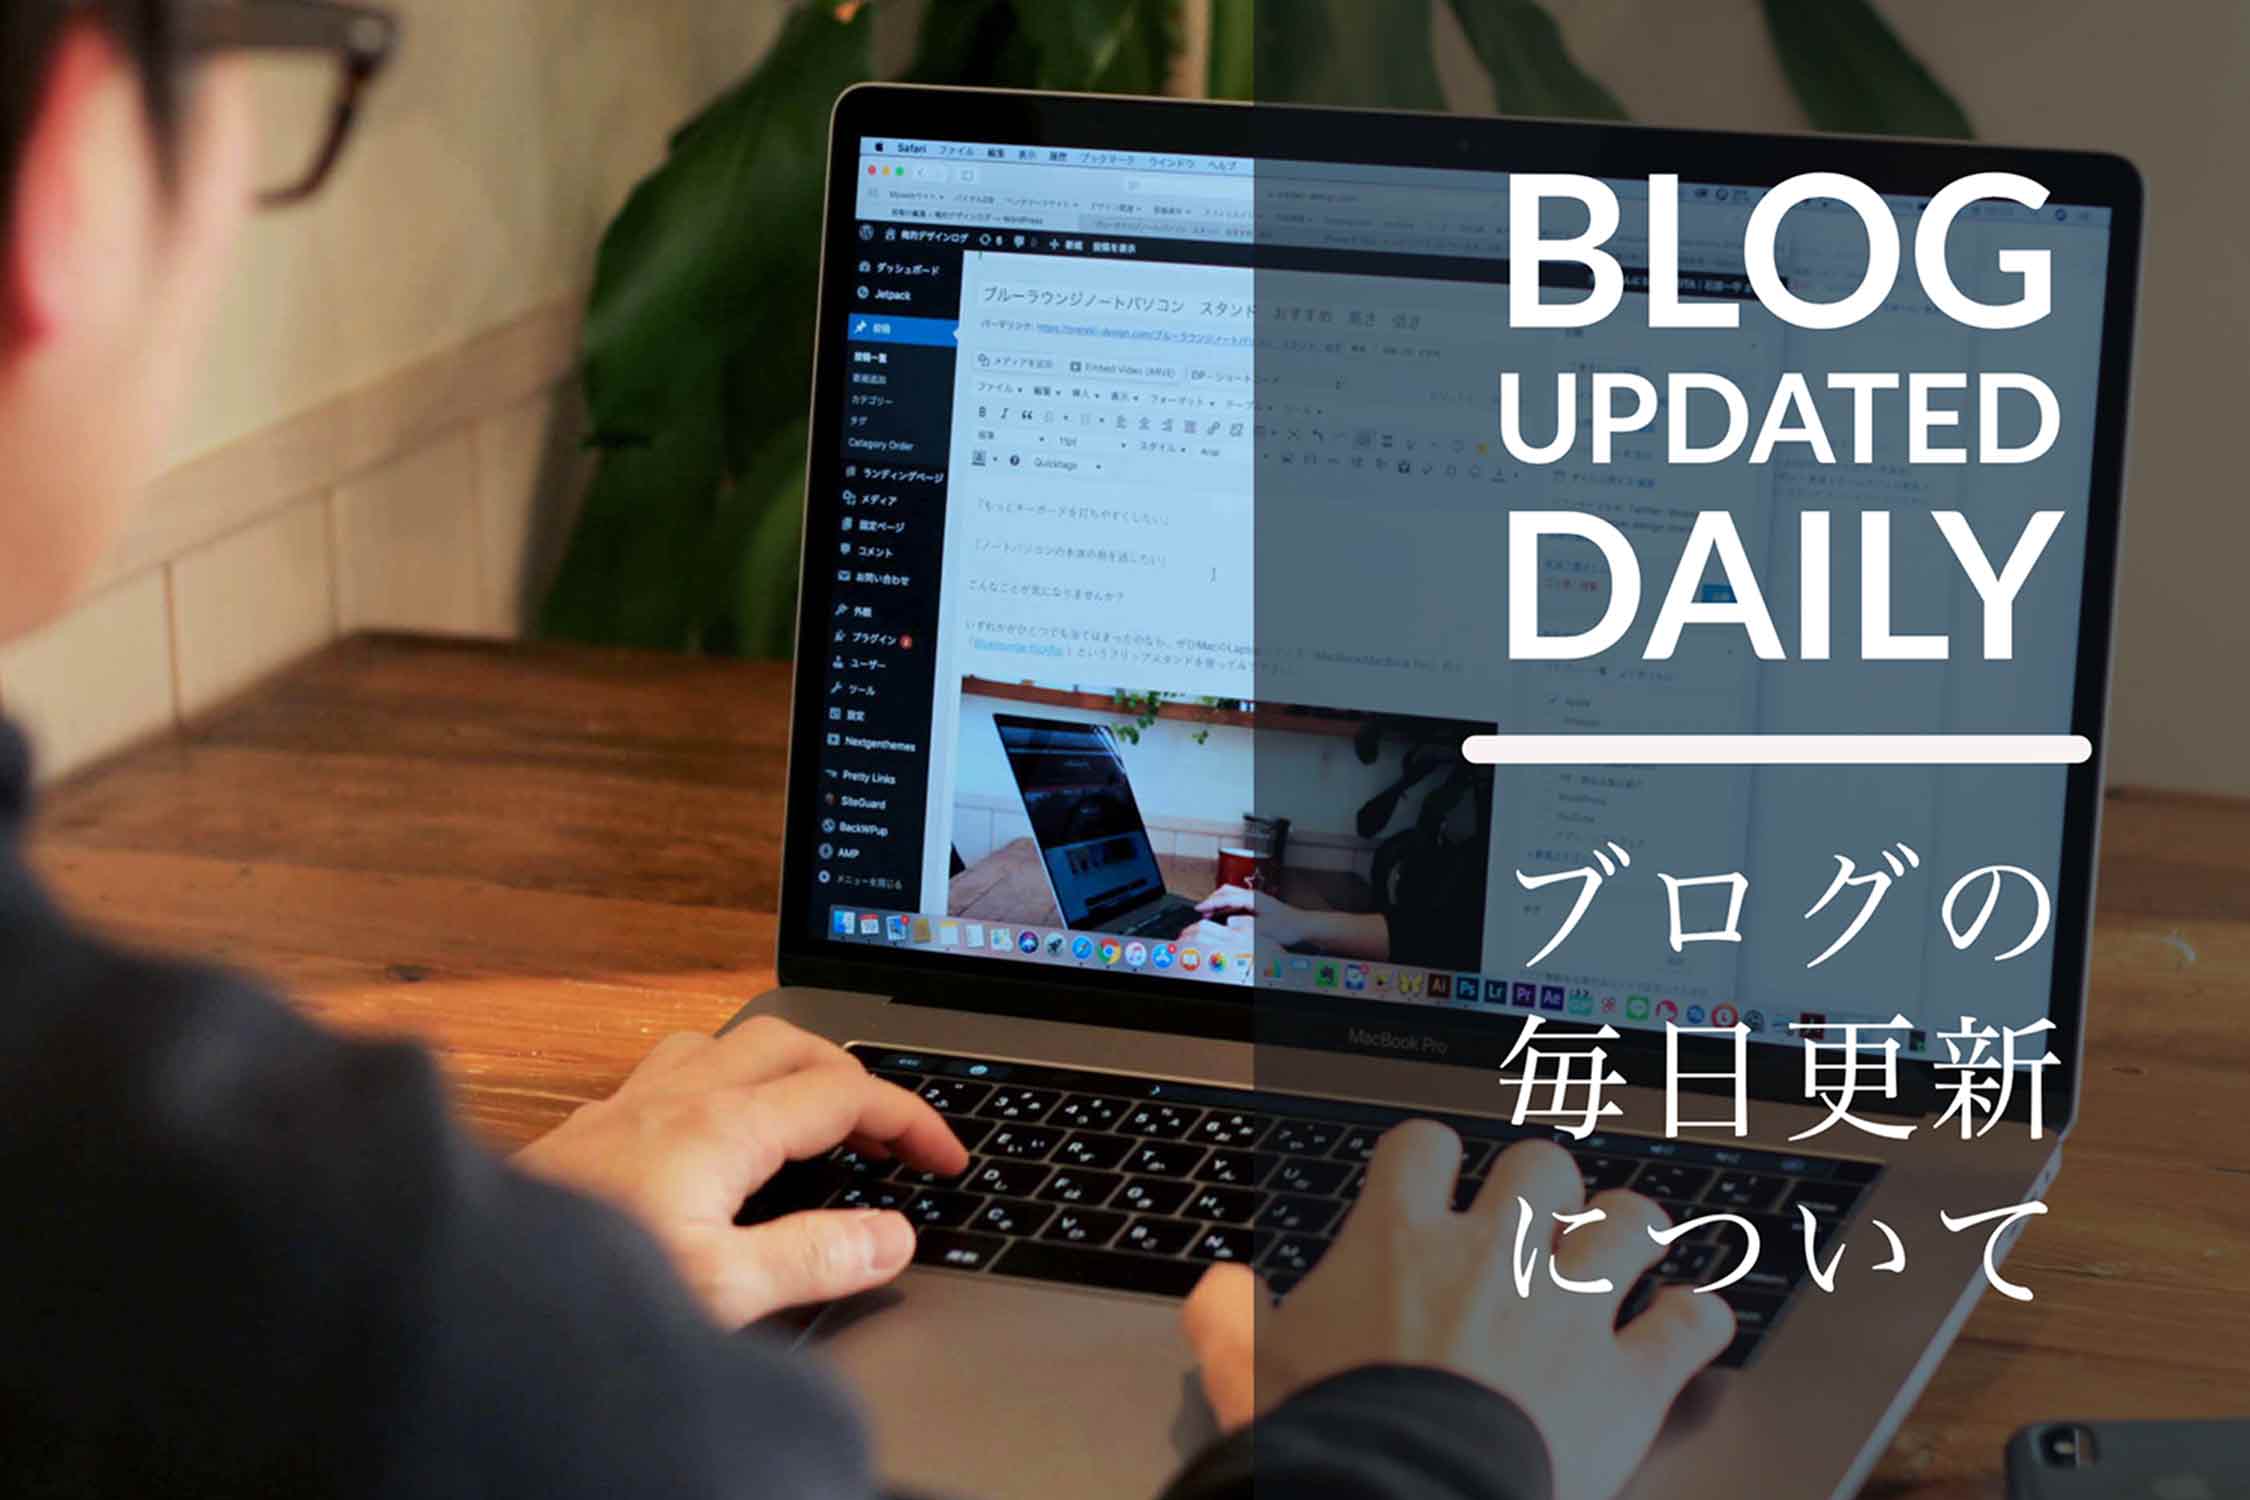 Blog update daily article